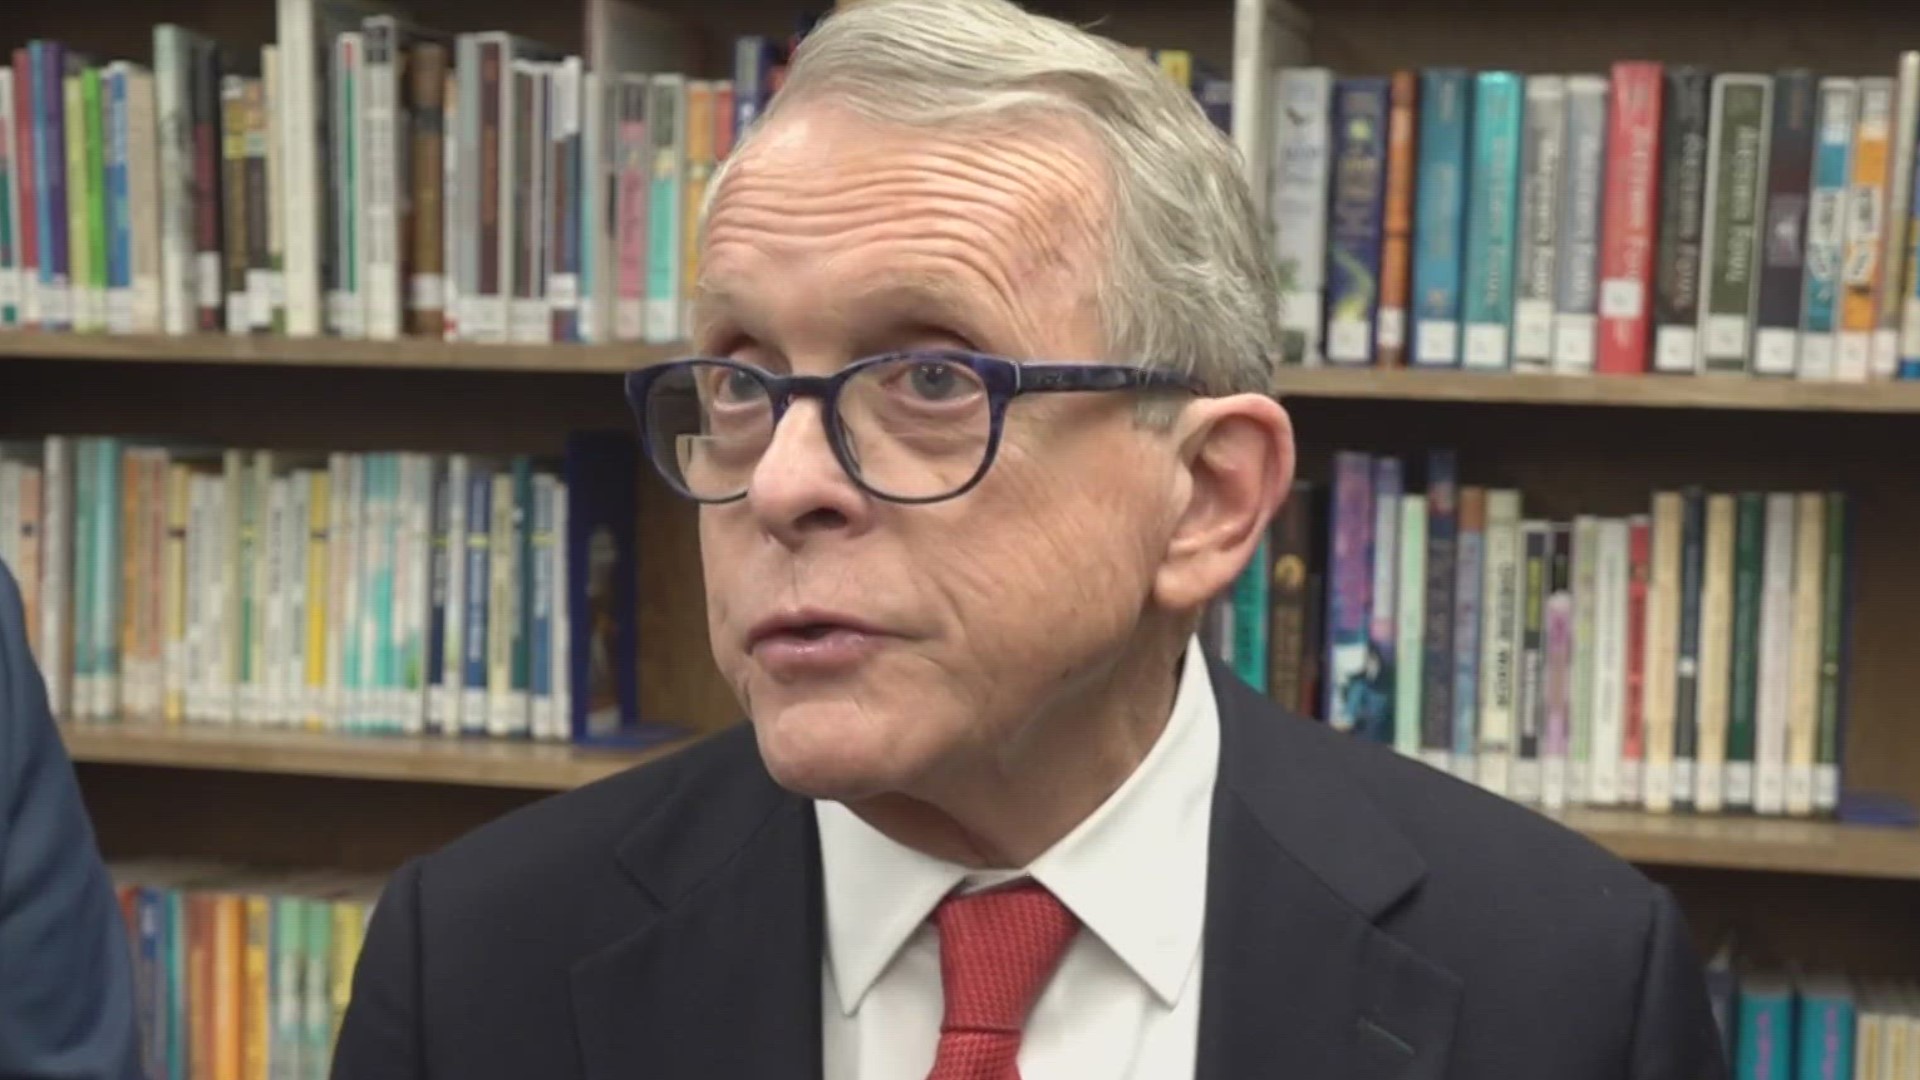 WTOL 11 reporter Michael Sandlin spoke with Ohio Gov. DeWine about current student safety, gun control and whether the state is moving in the right direction.